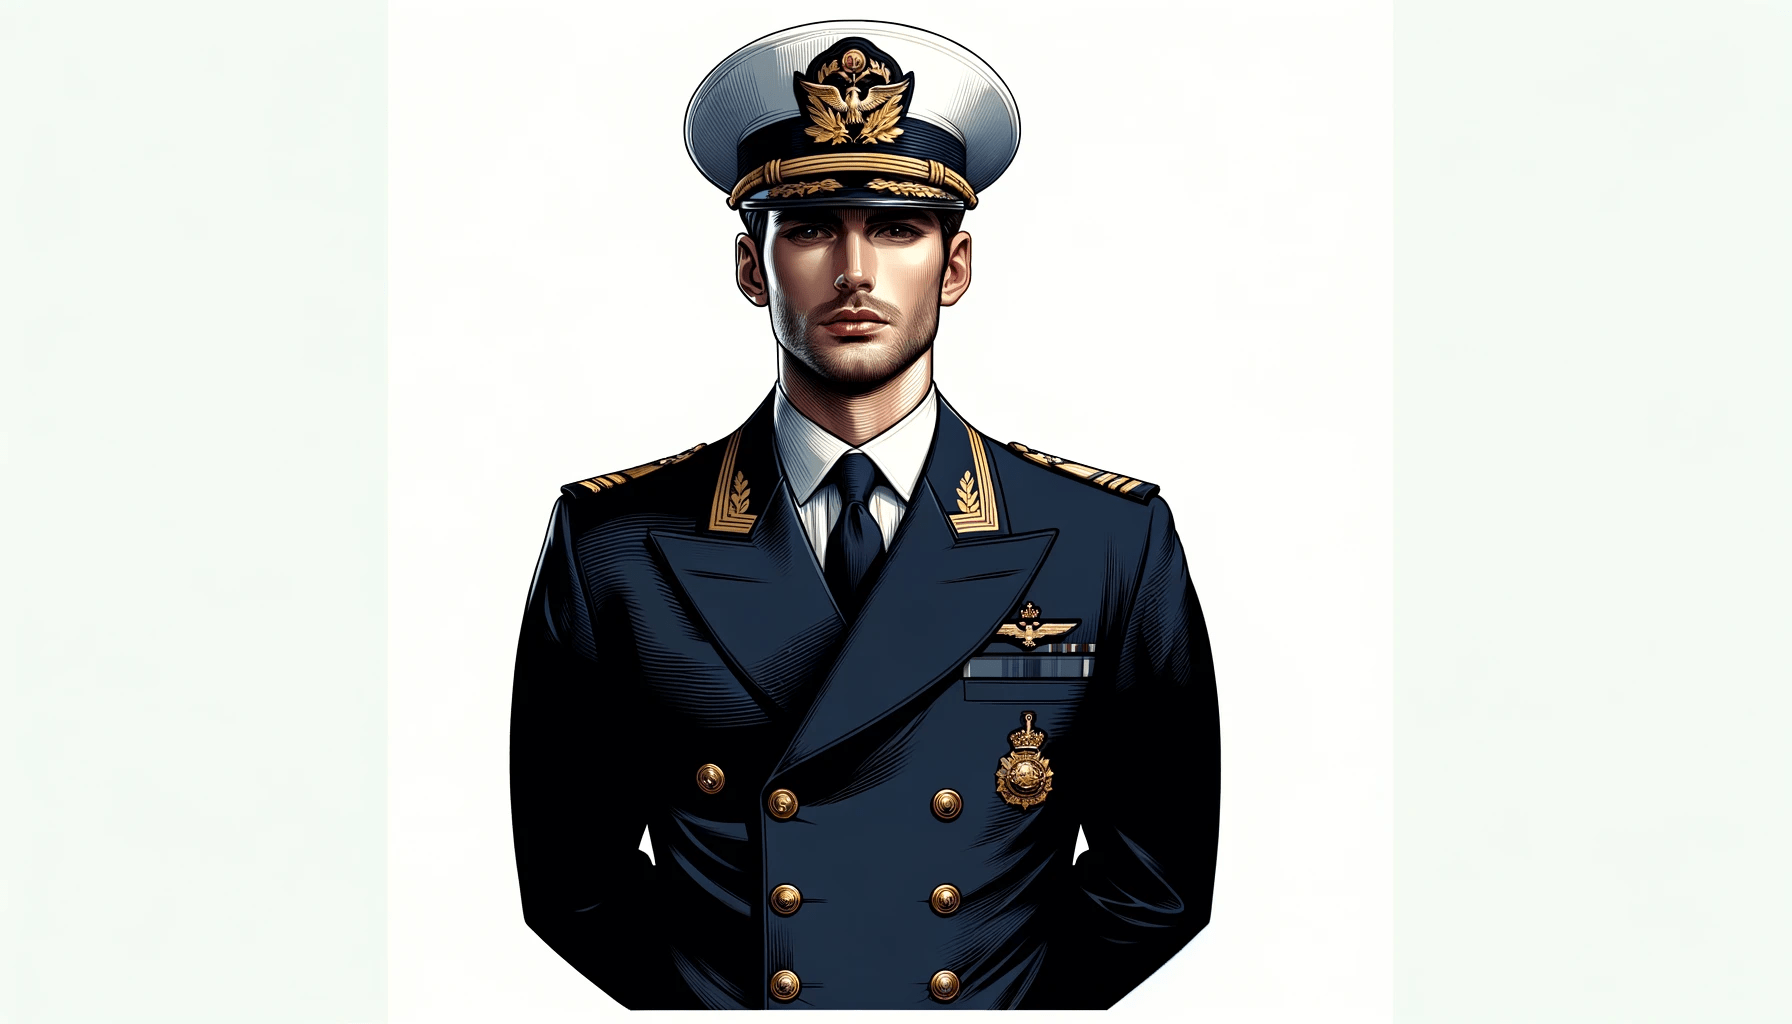 The French Naval Uniform